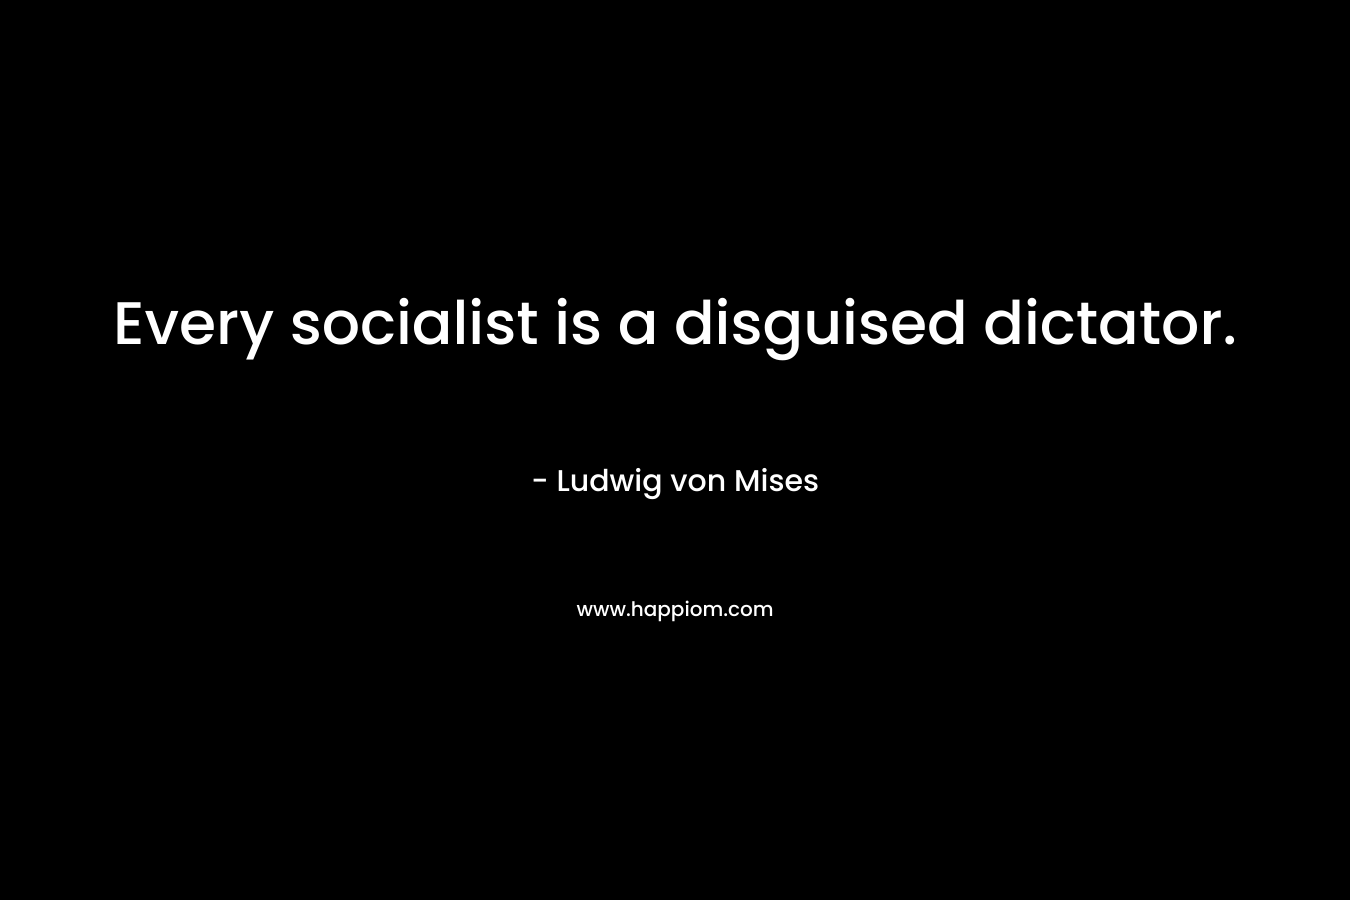 Every socialist is a disguised dictator.